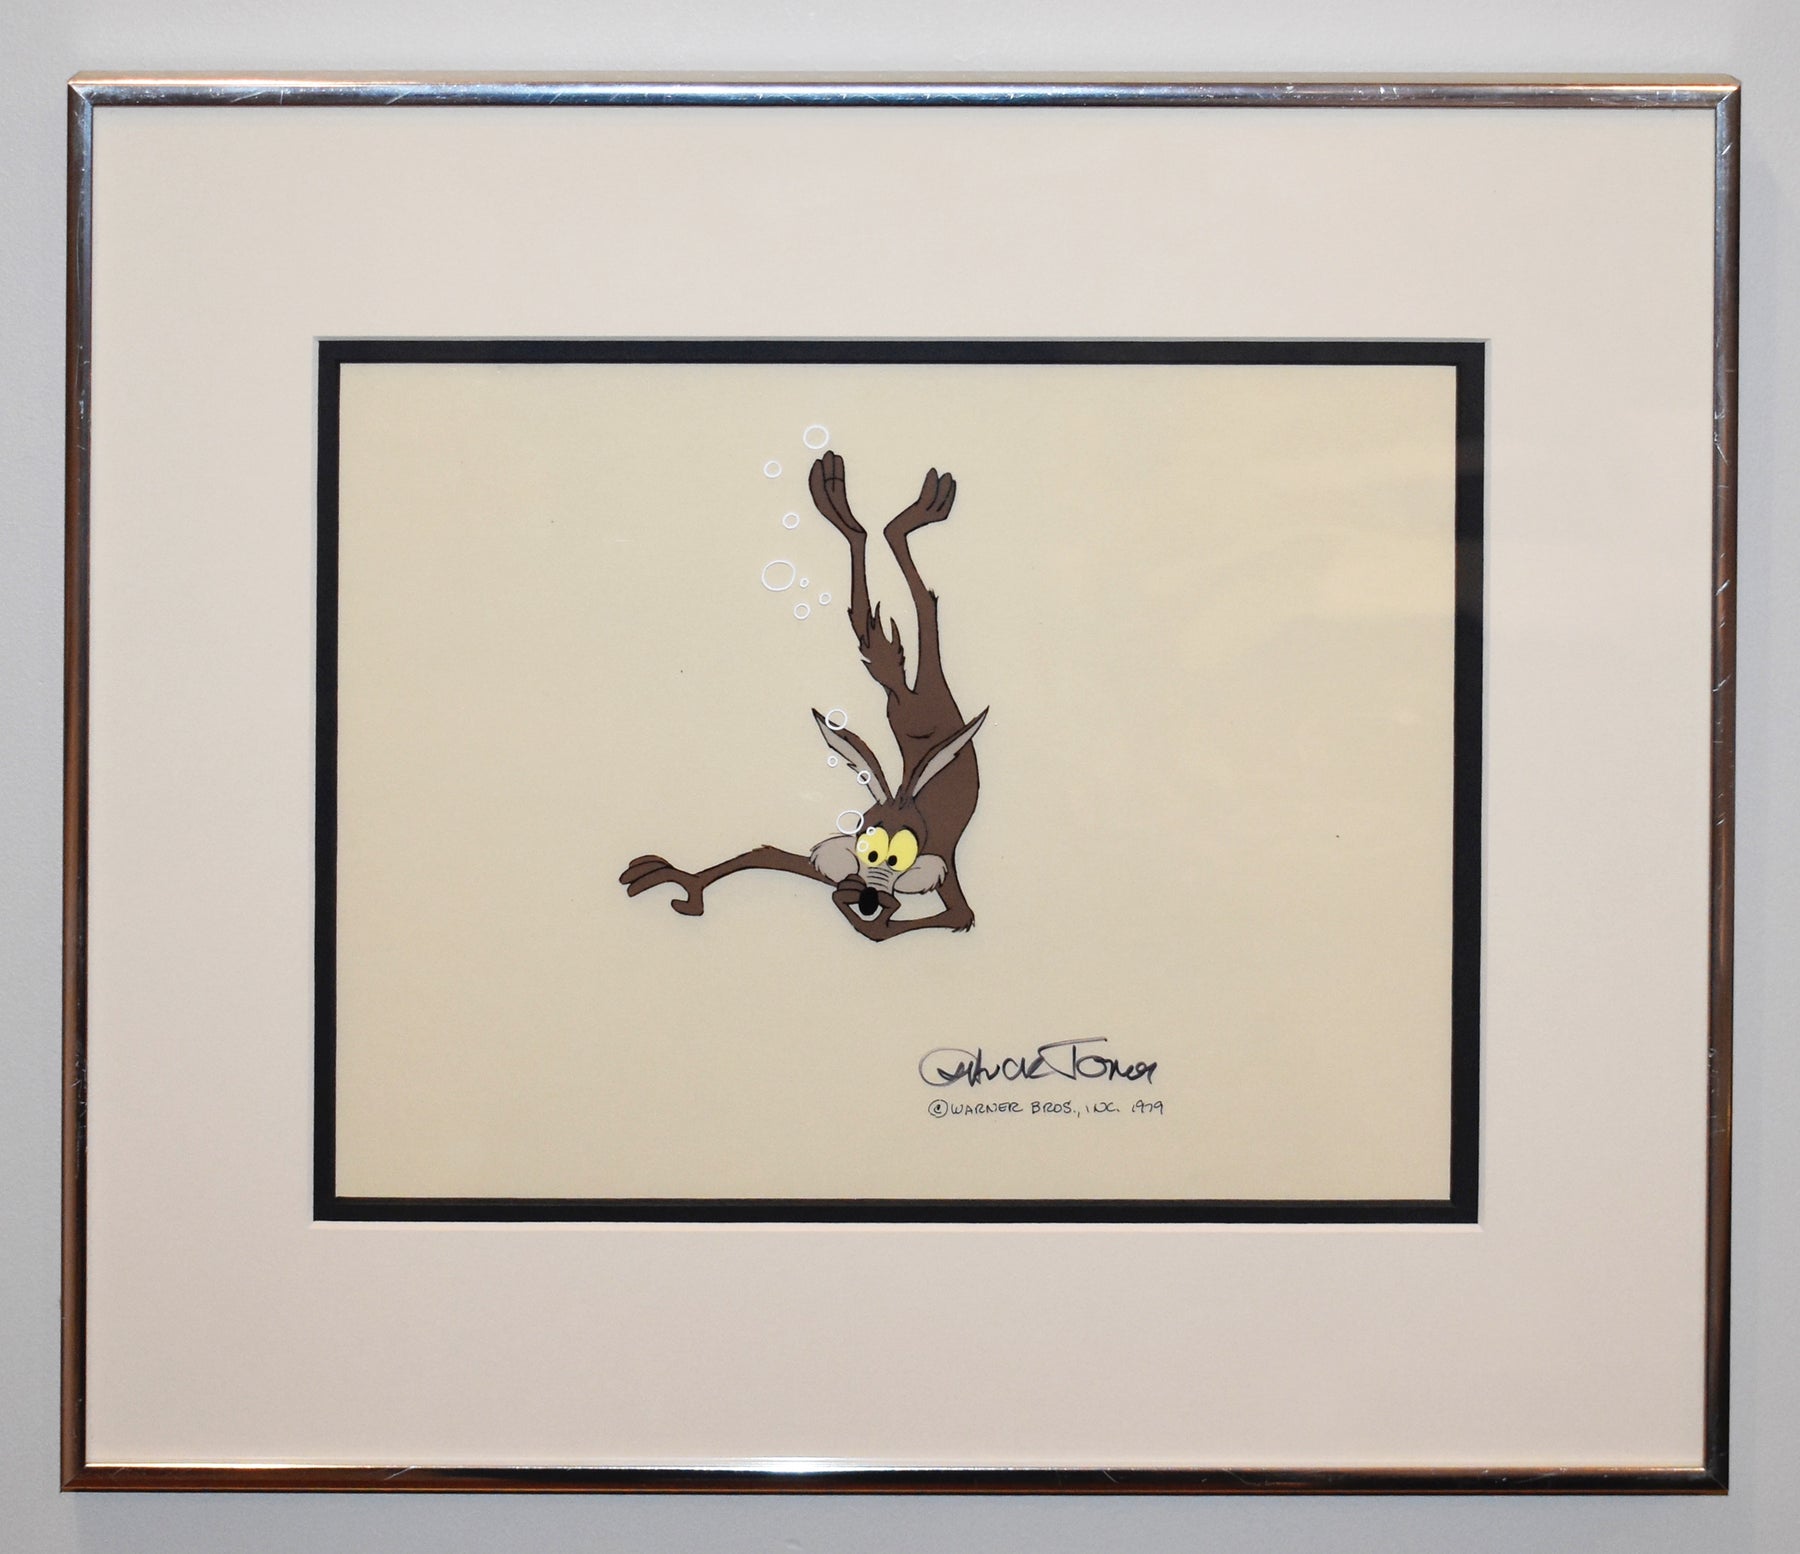 Original Warner Brothers Production Cel Featuring Wile E. Coyote from ...